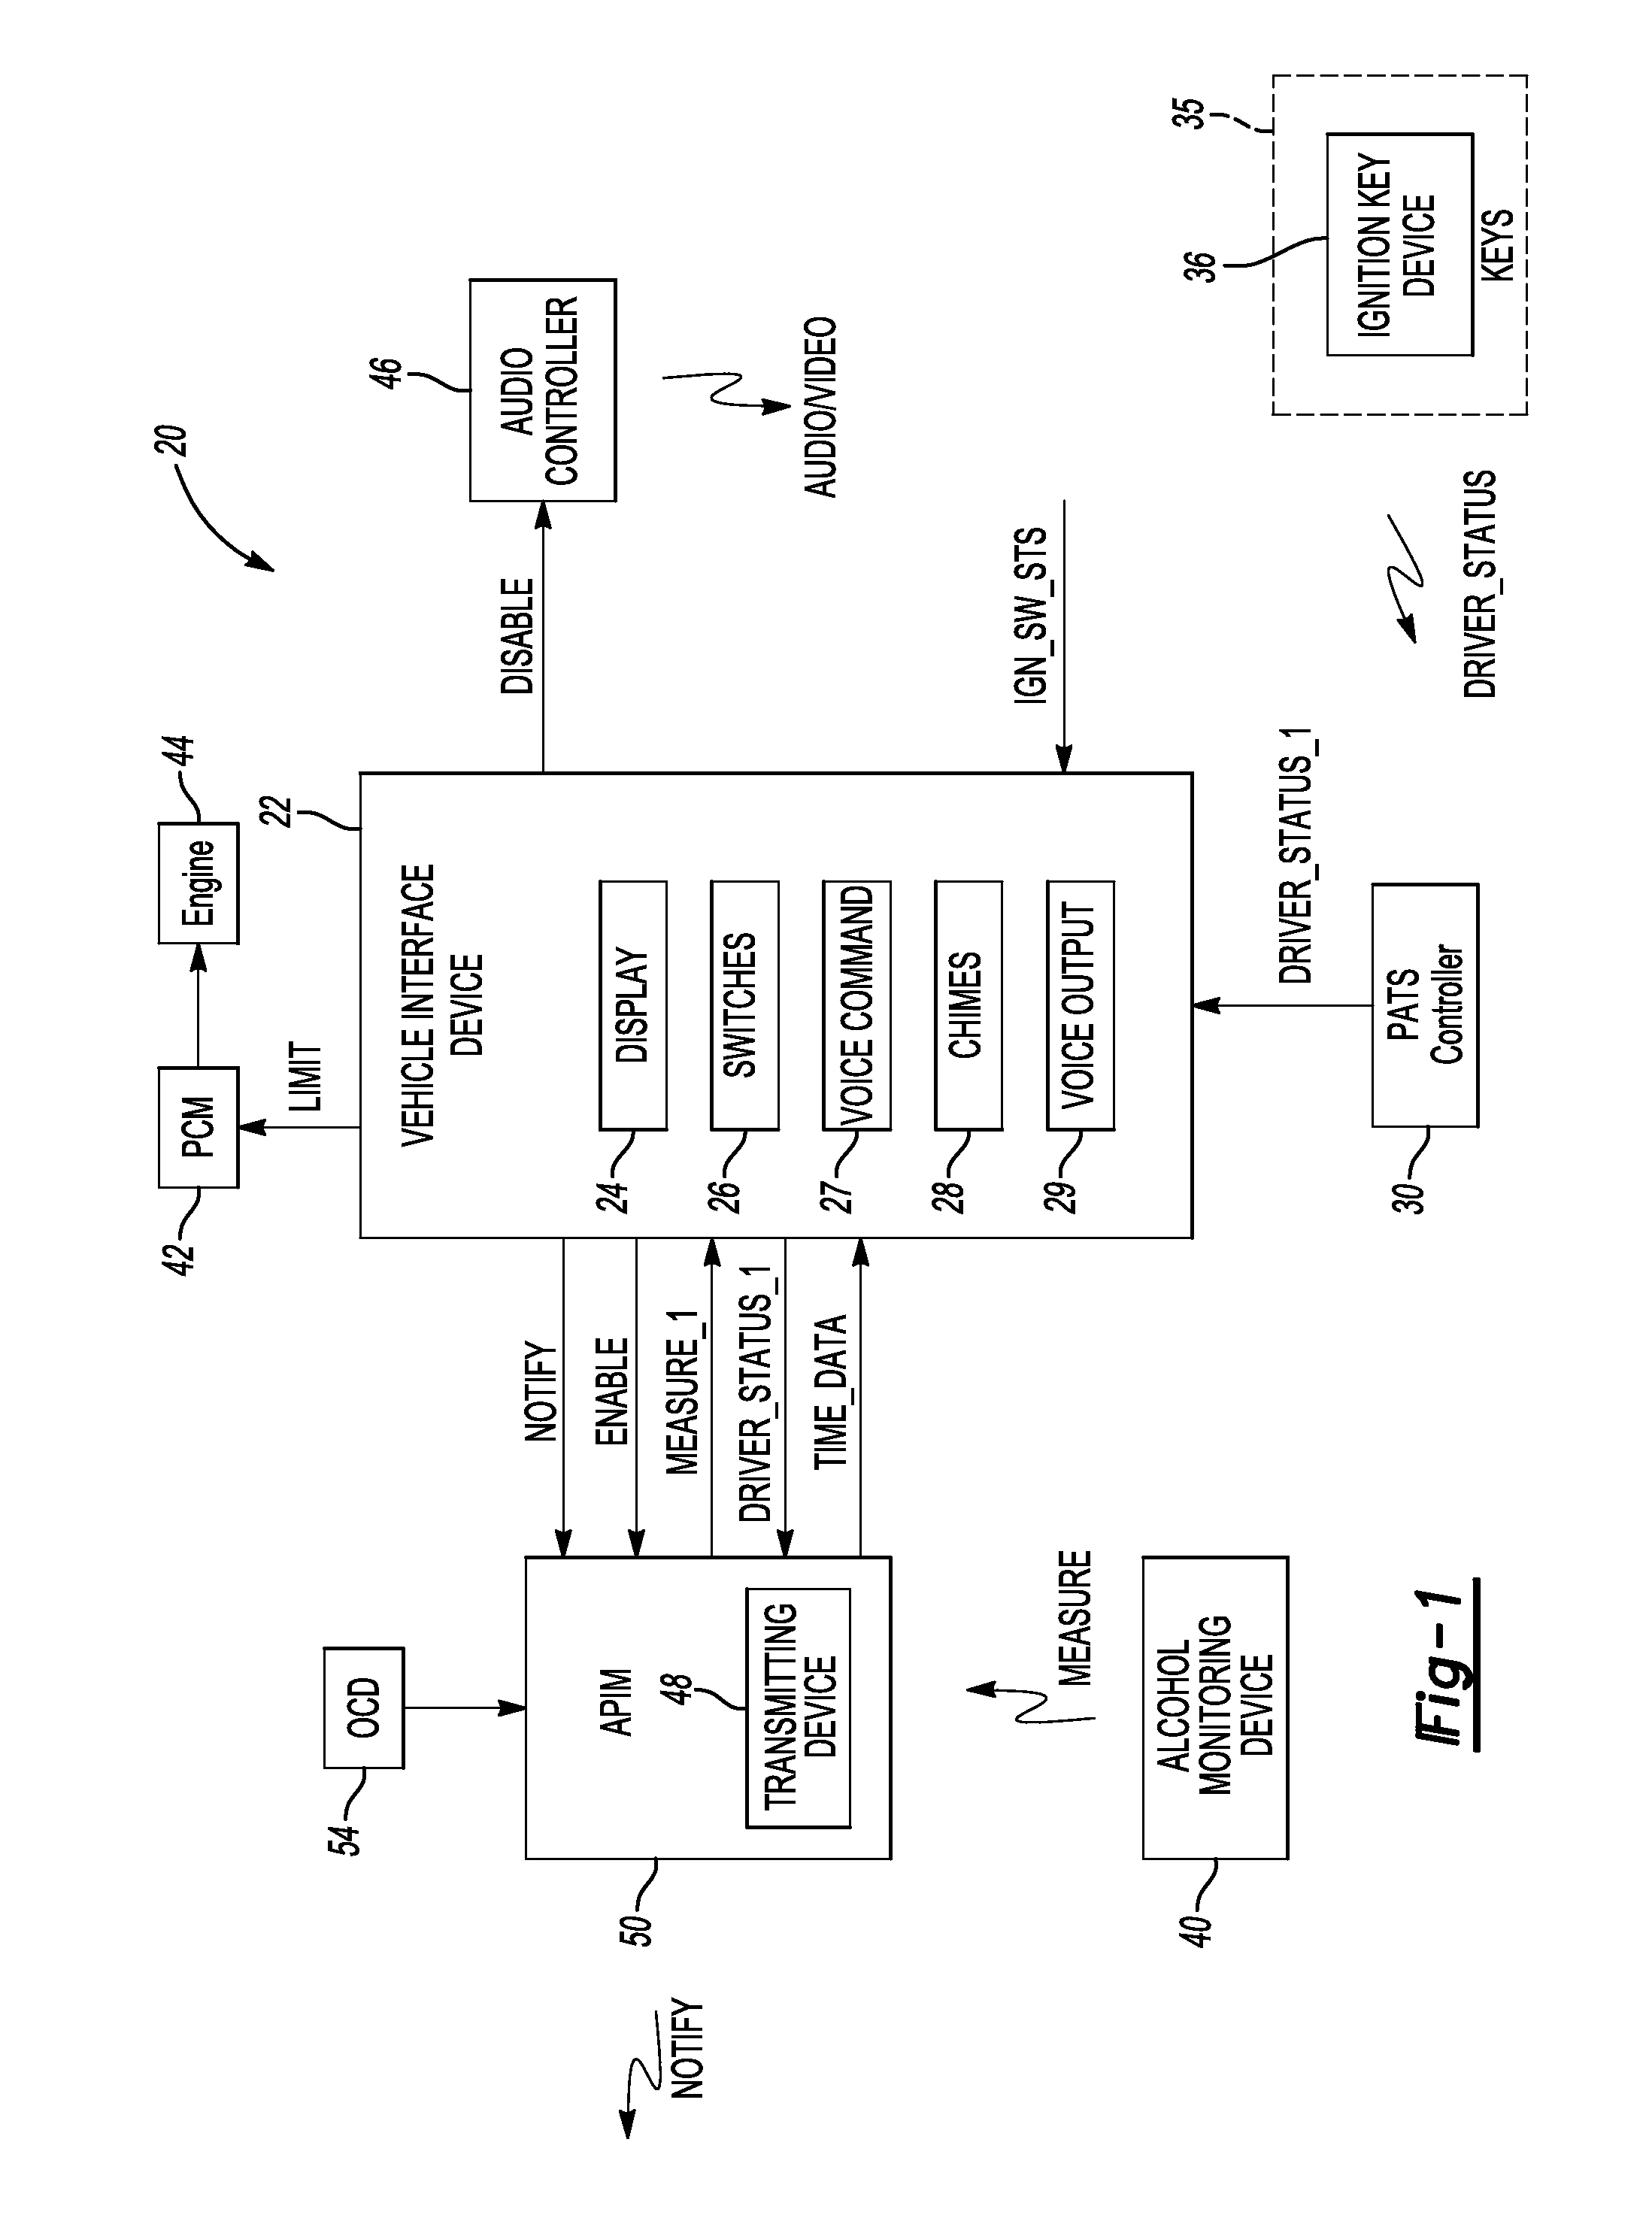 System and method for alcohol monitor based on driver status